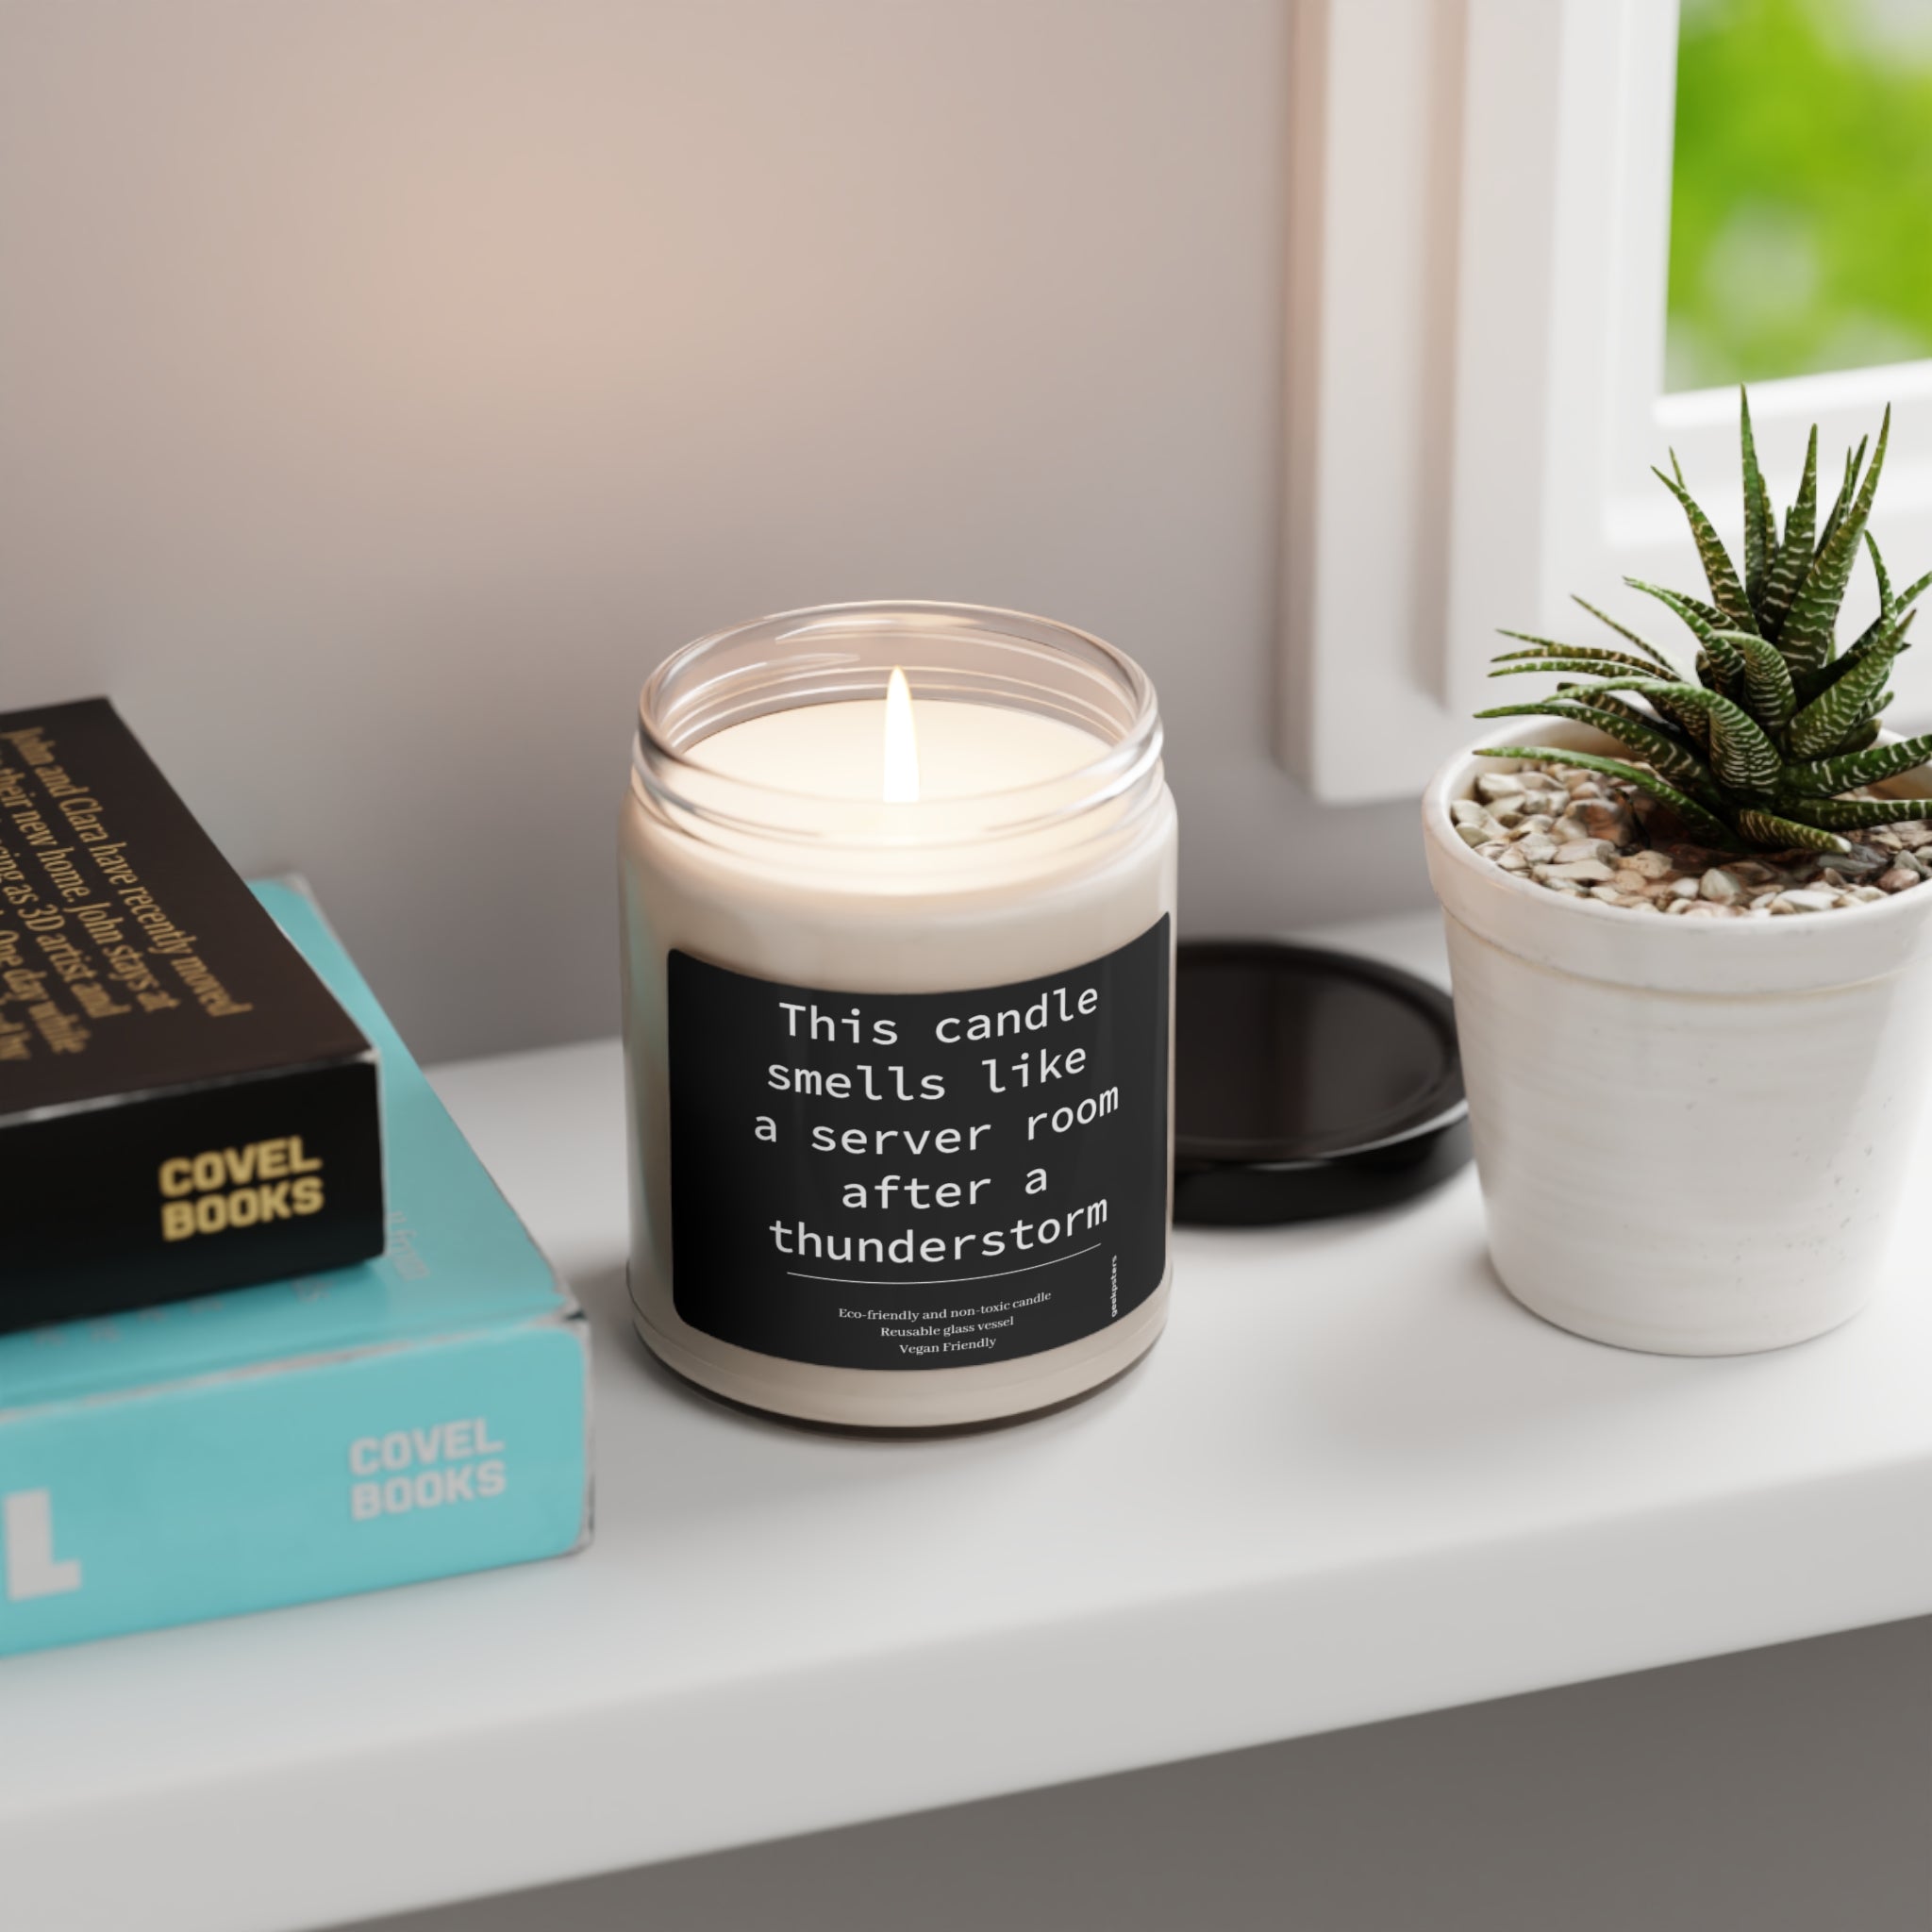 A "This Candle Smells Like a Server Room After a Thunderstorm" scented candle with a humorous label placed on a windowsill next to books and a potted plant.